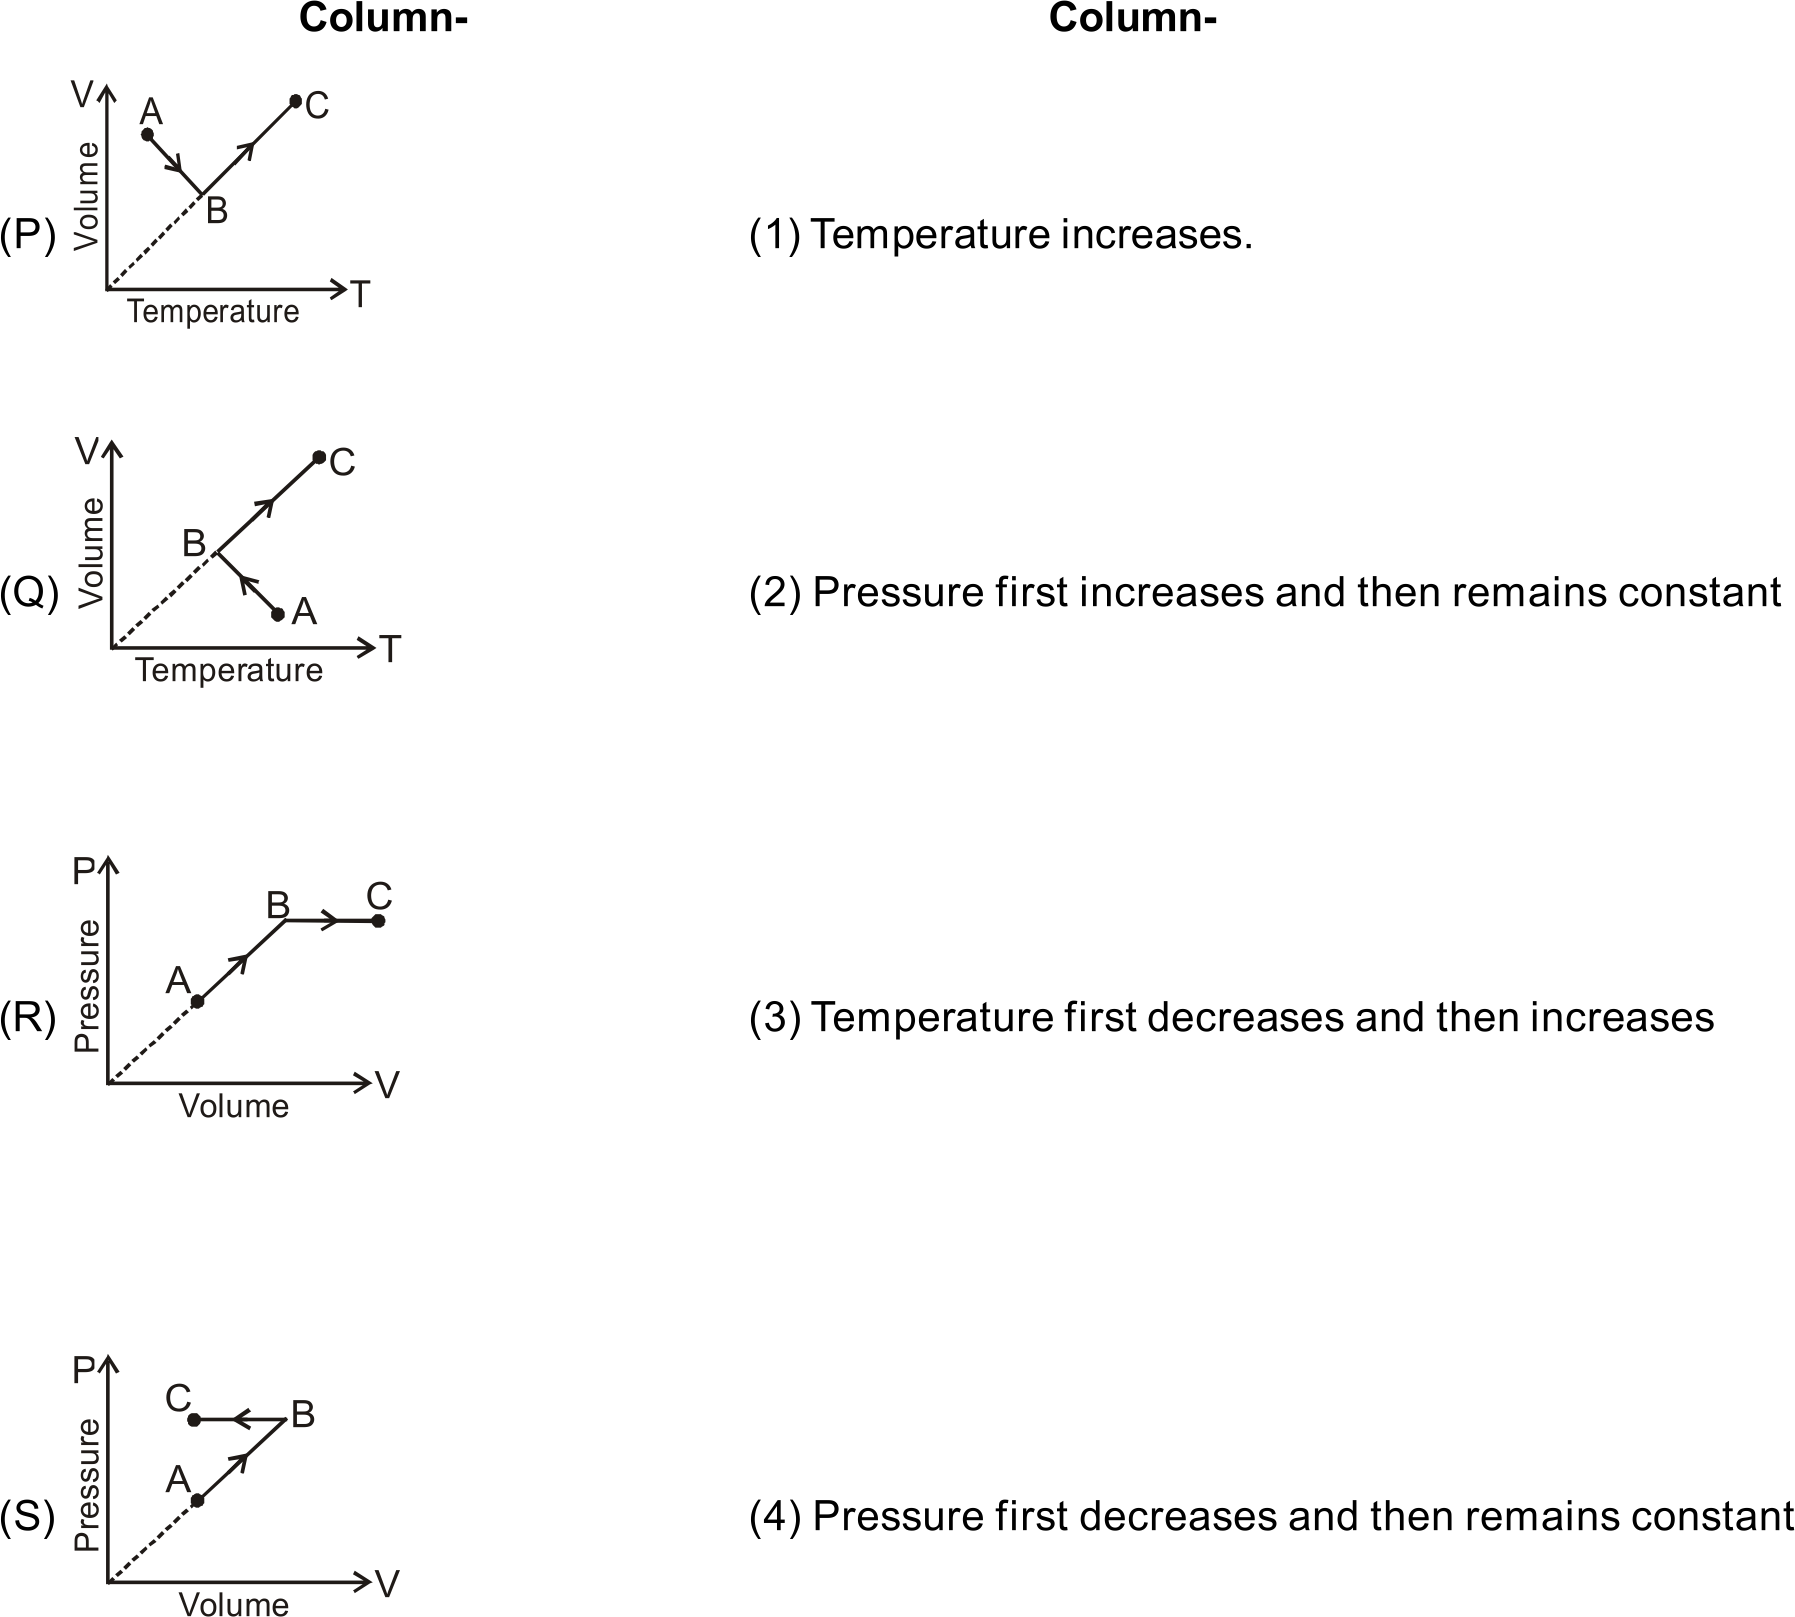 In each situation of column-I,a process ArarrBrarrC is given for an ideal gas. Match the proper entries from column-2 to column-1 using the codes given below the columns